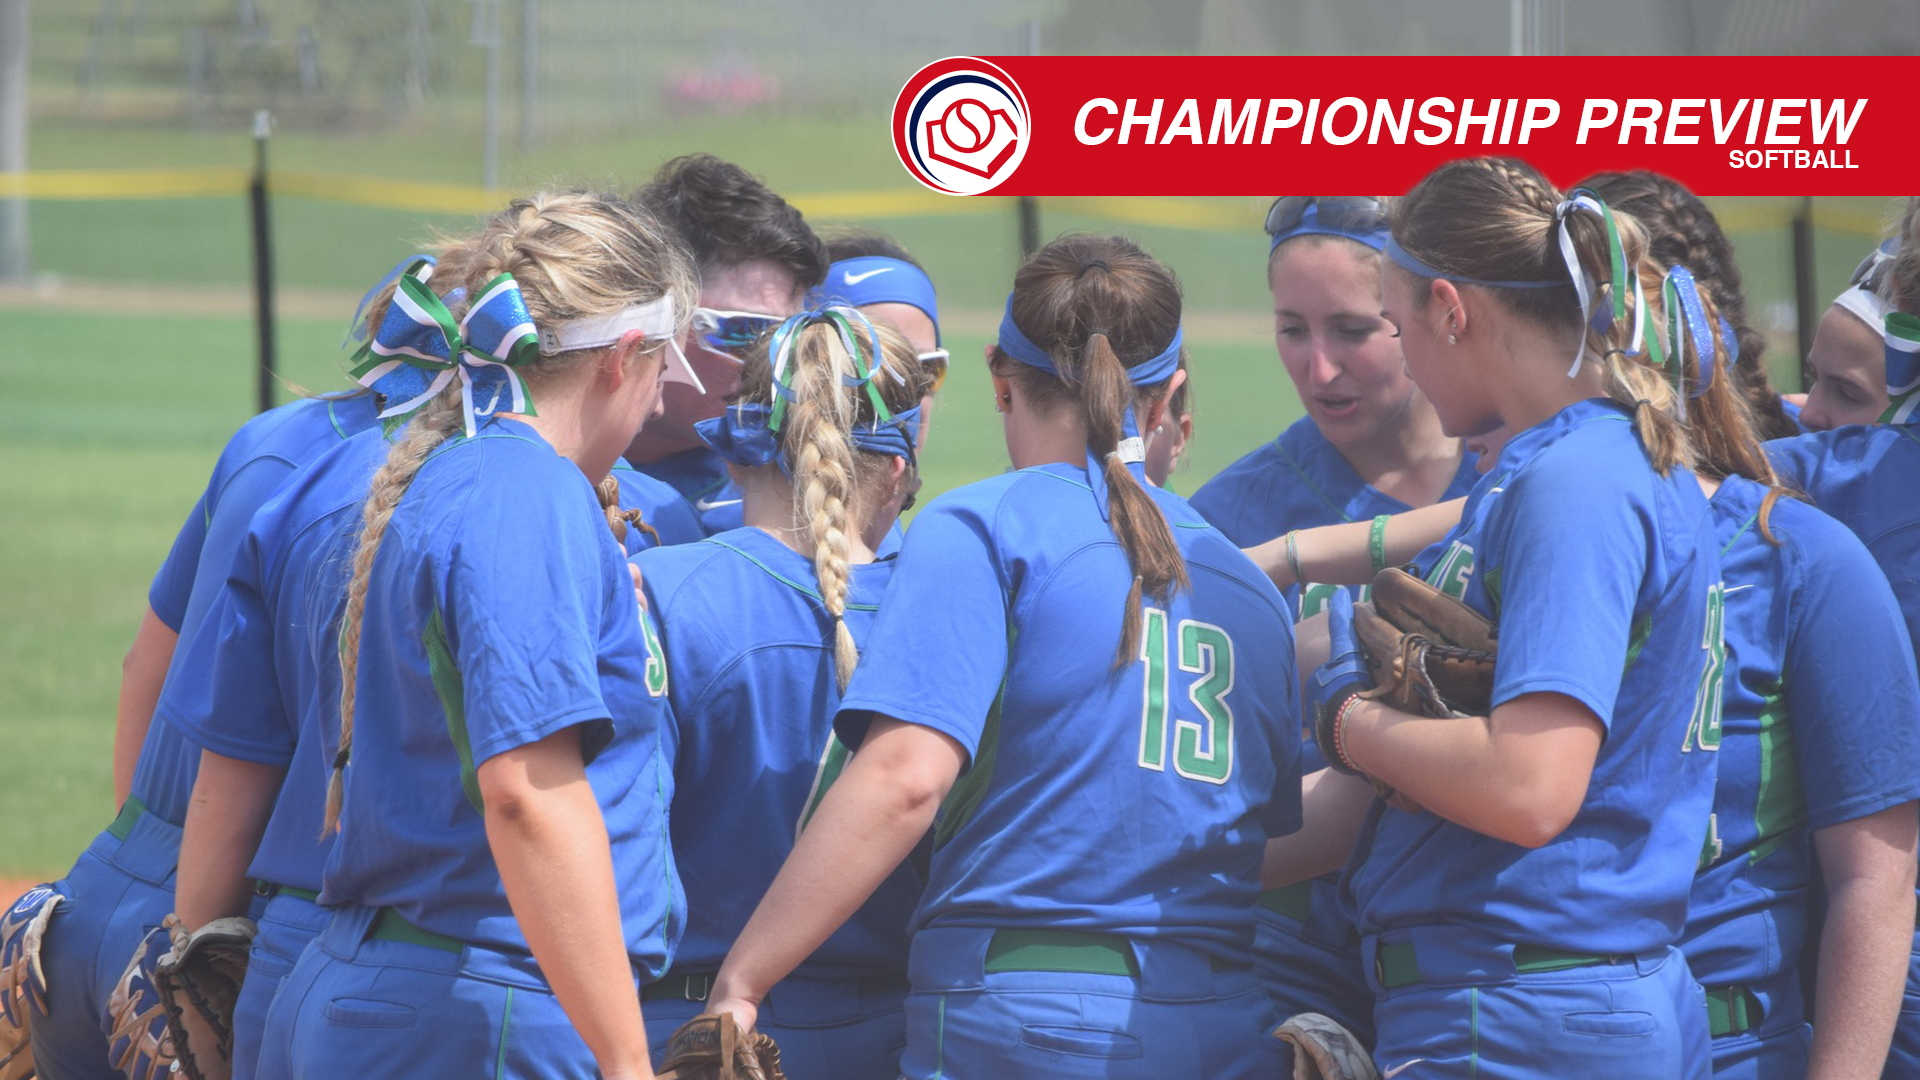 No. 4 seed Salve Regina plays No. 5 seed Roger Williams in opening round of the CCC softball championships.